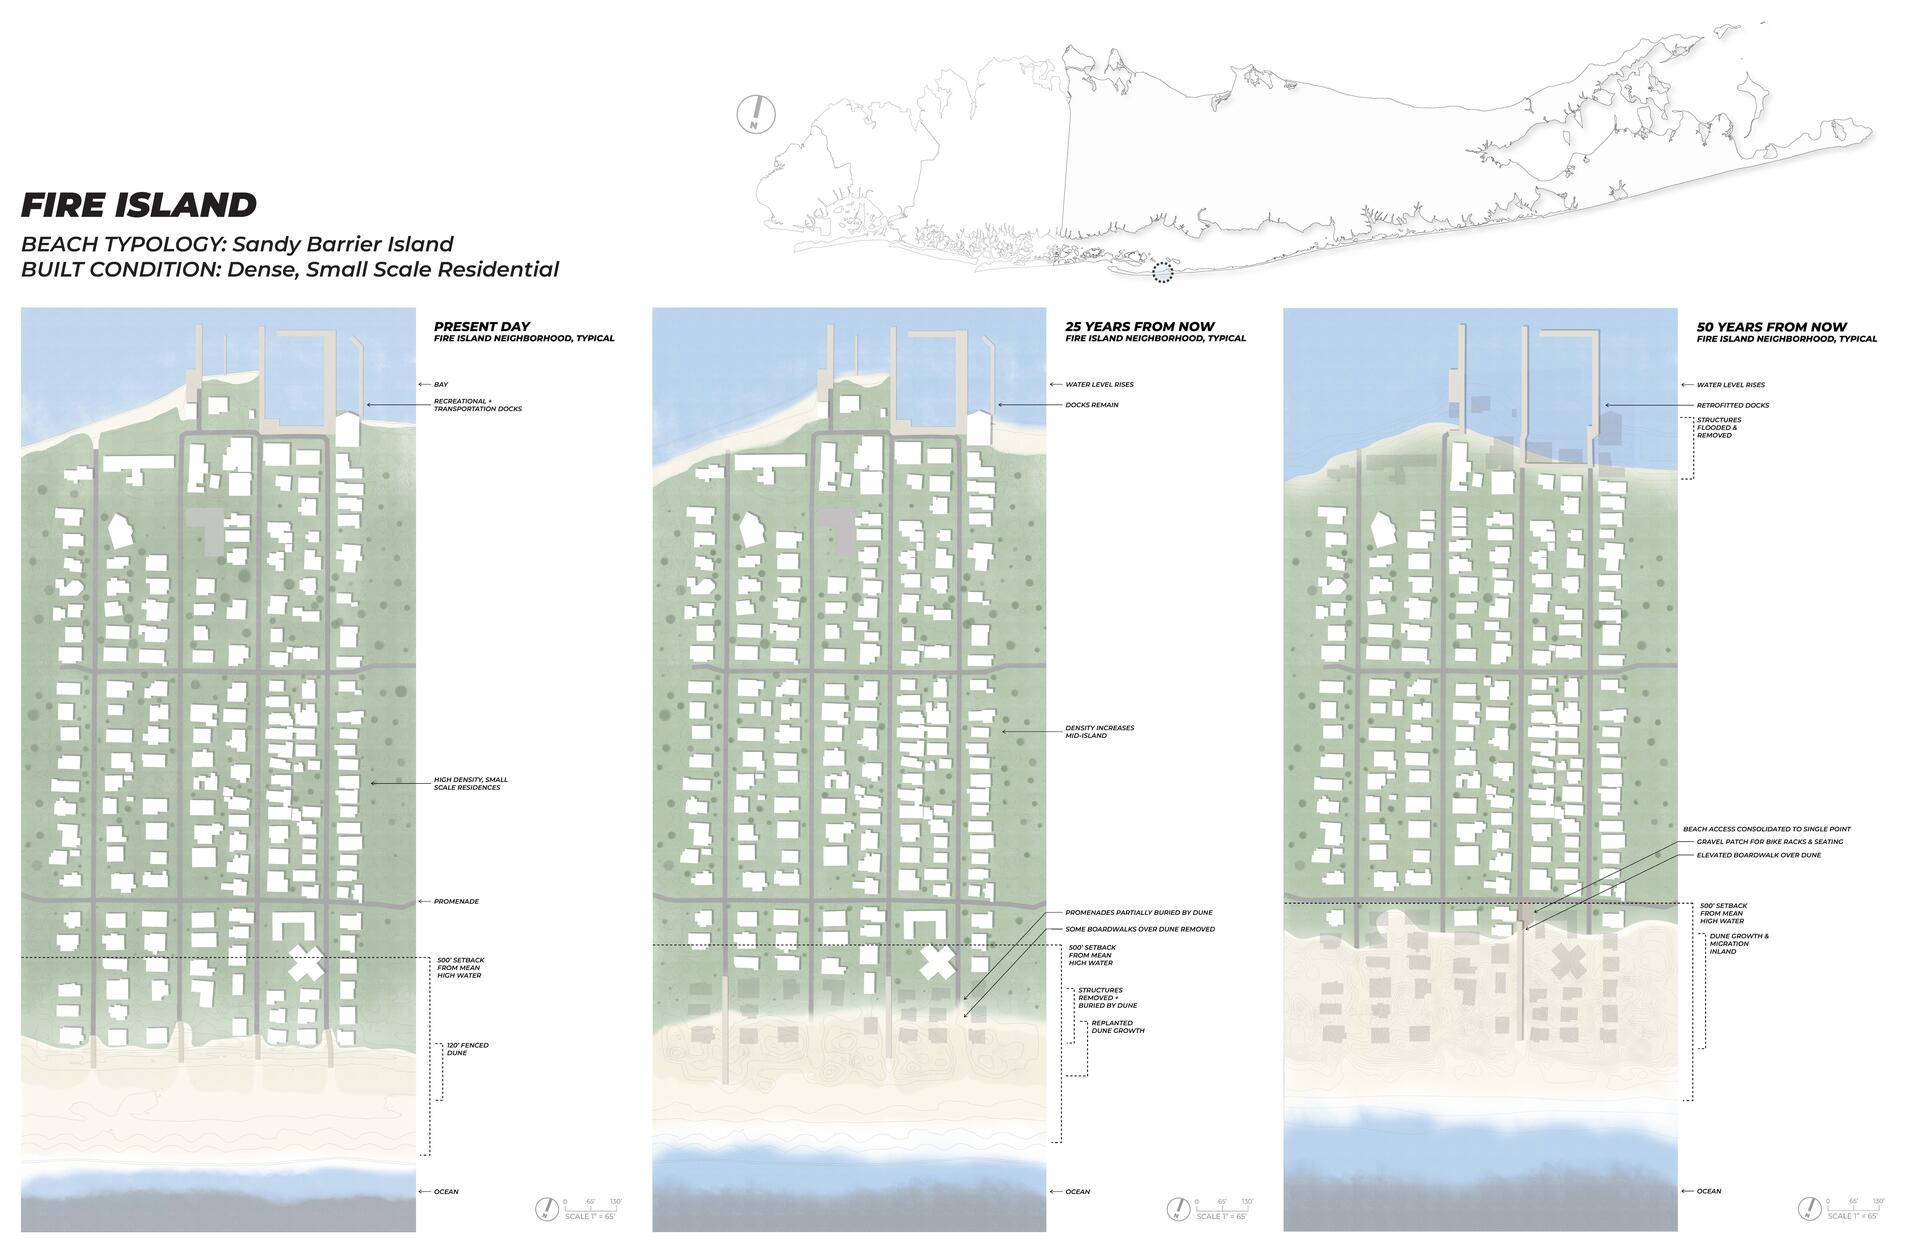 Plan drawings showing present day conditions and a speculative future of Smith Point at 25 and 50 years from now. Linework plan showing location of Smith Point. Textual information about coastal typology.